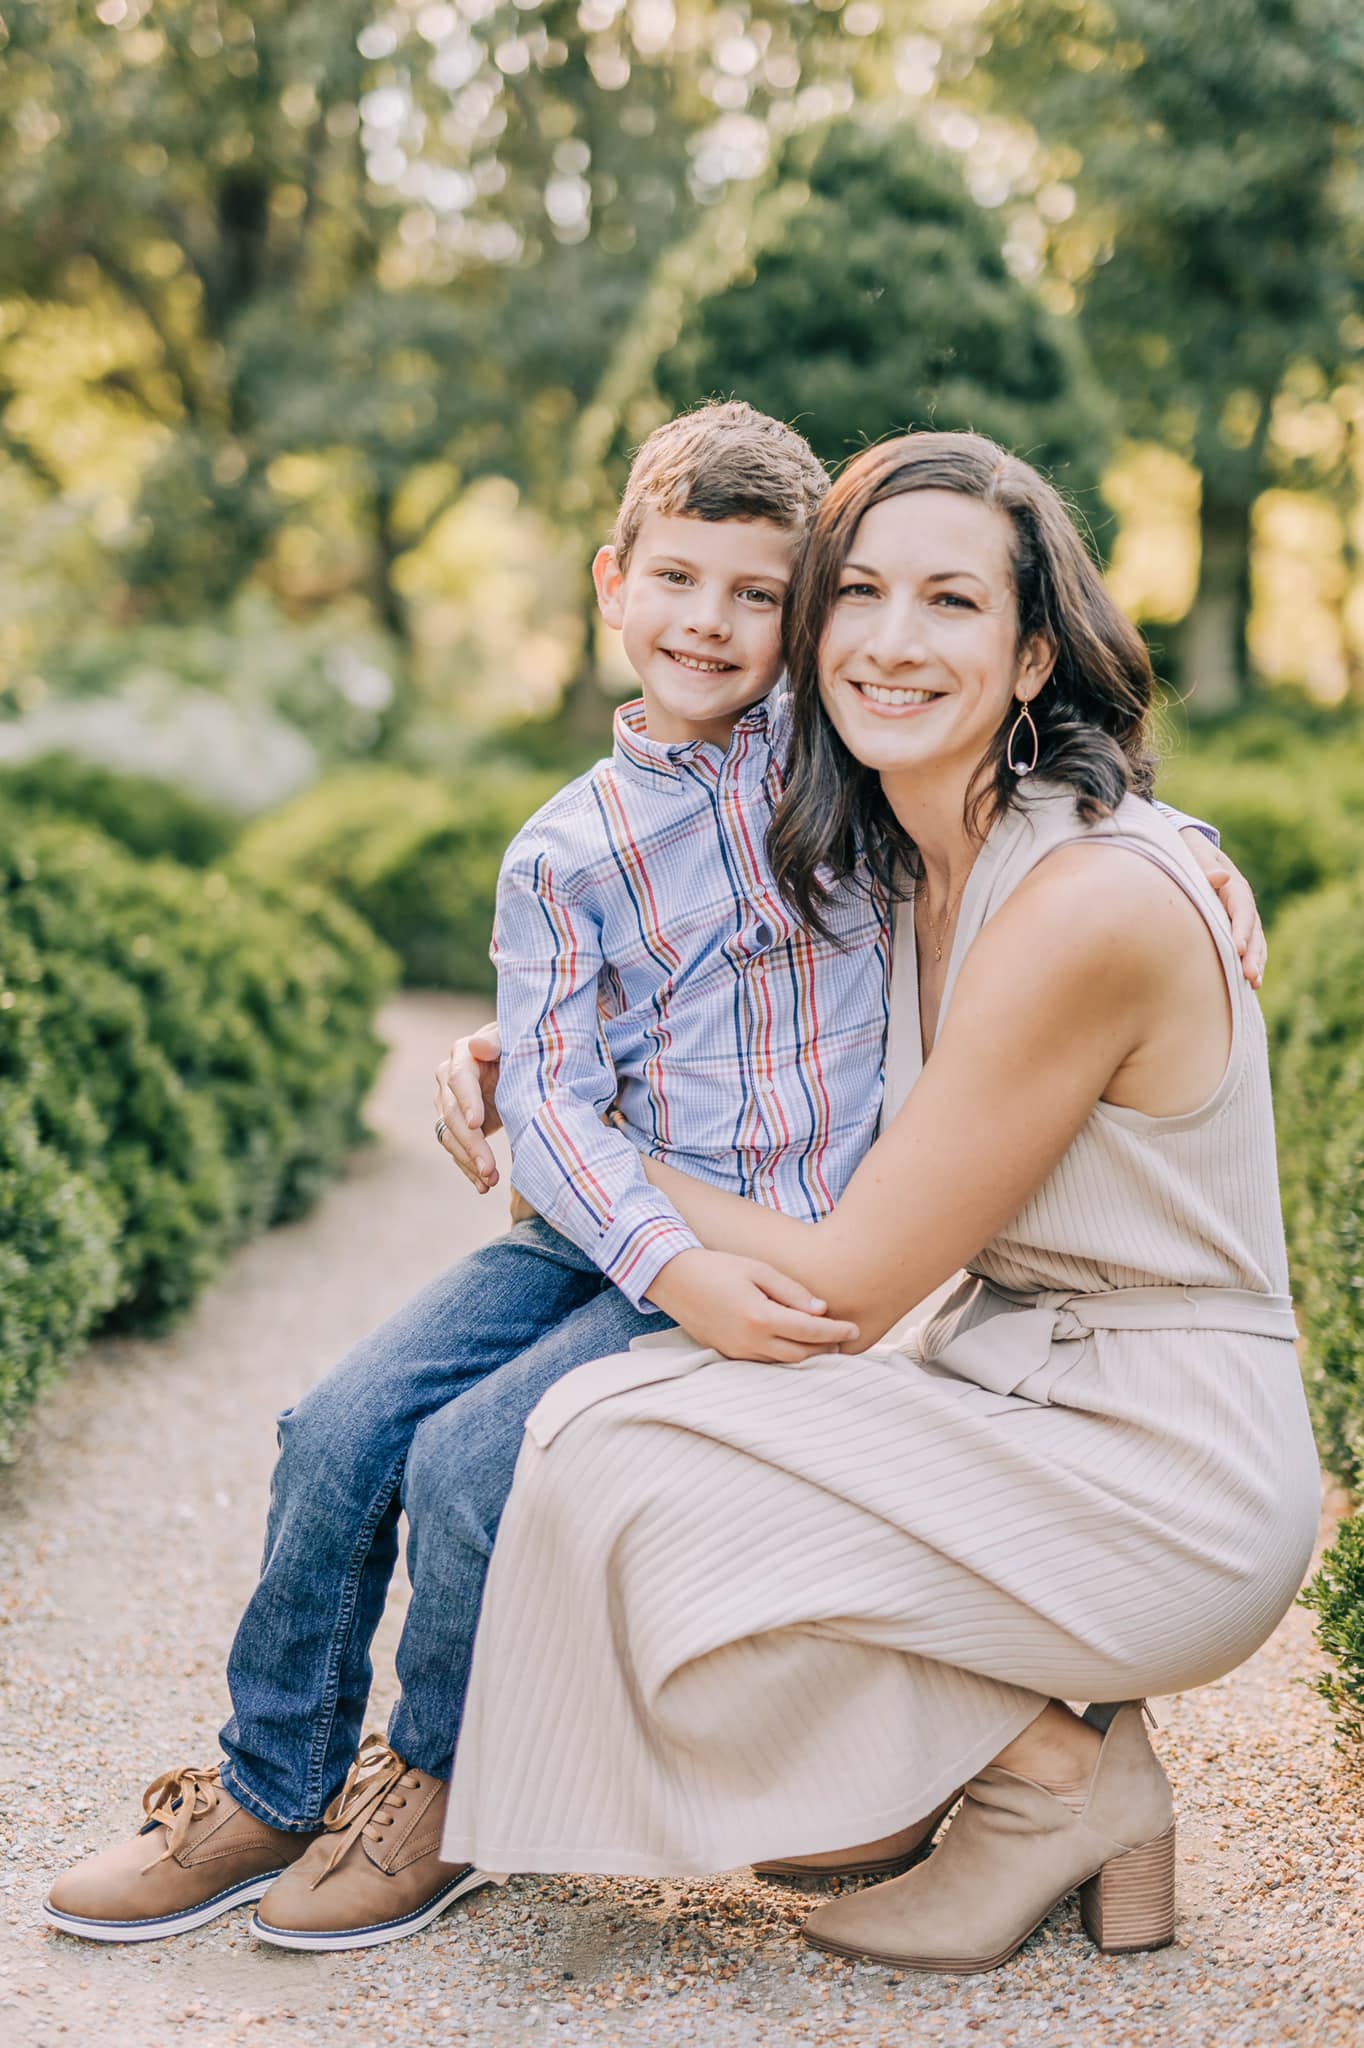 About Whitney Briscoe Photography, a Portrait Photographer in Madison, Alabama: Whitney offers portrait photographer for maternity, newborn, wedding, engagement, families, and more!